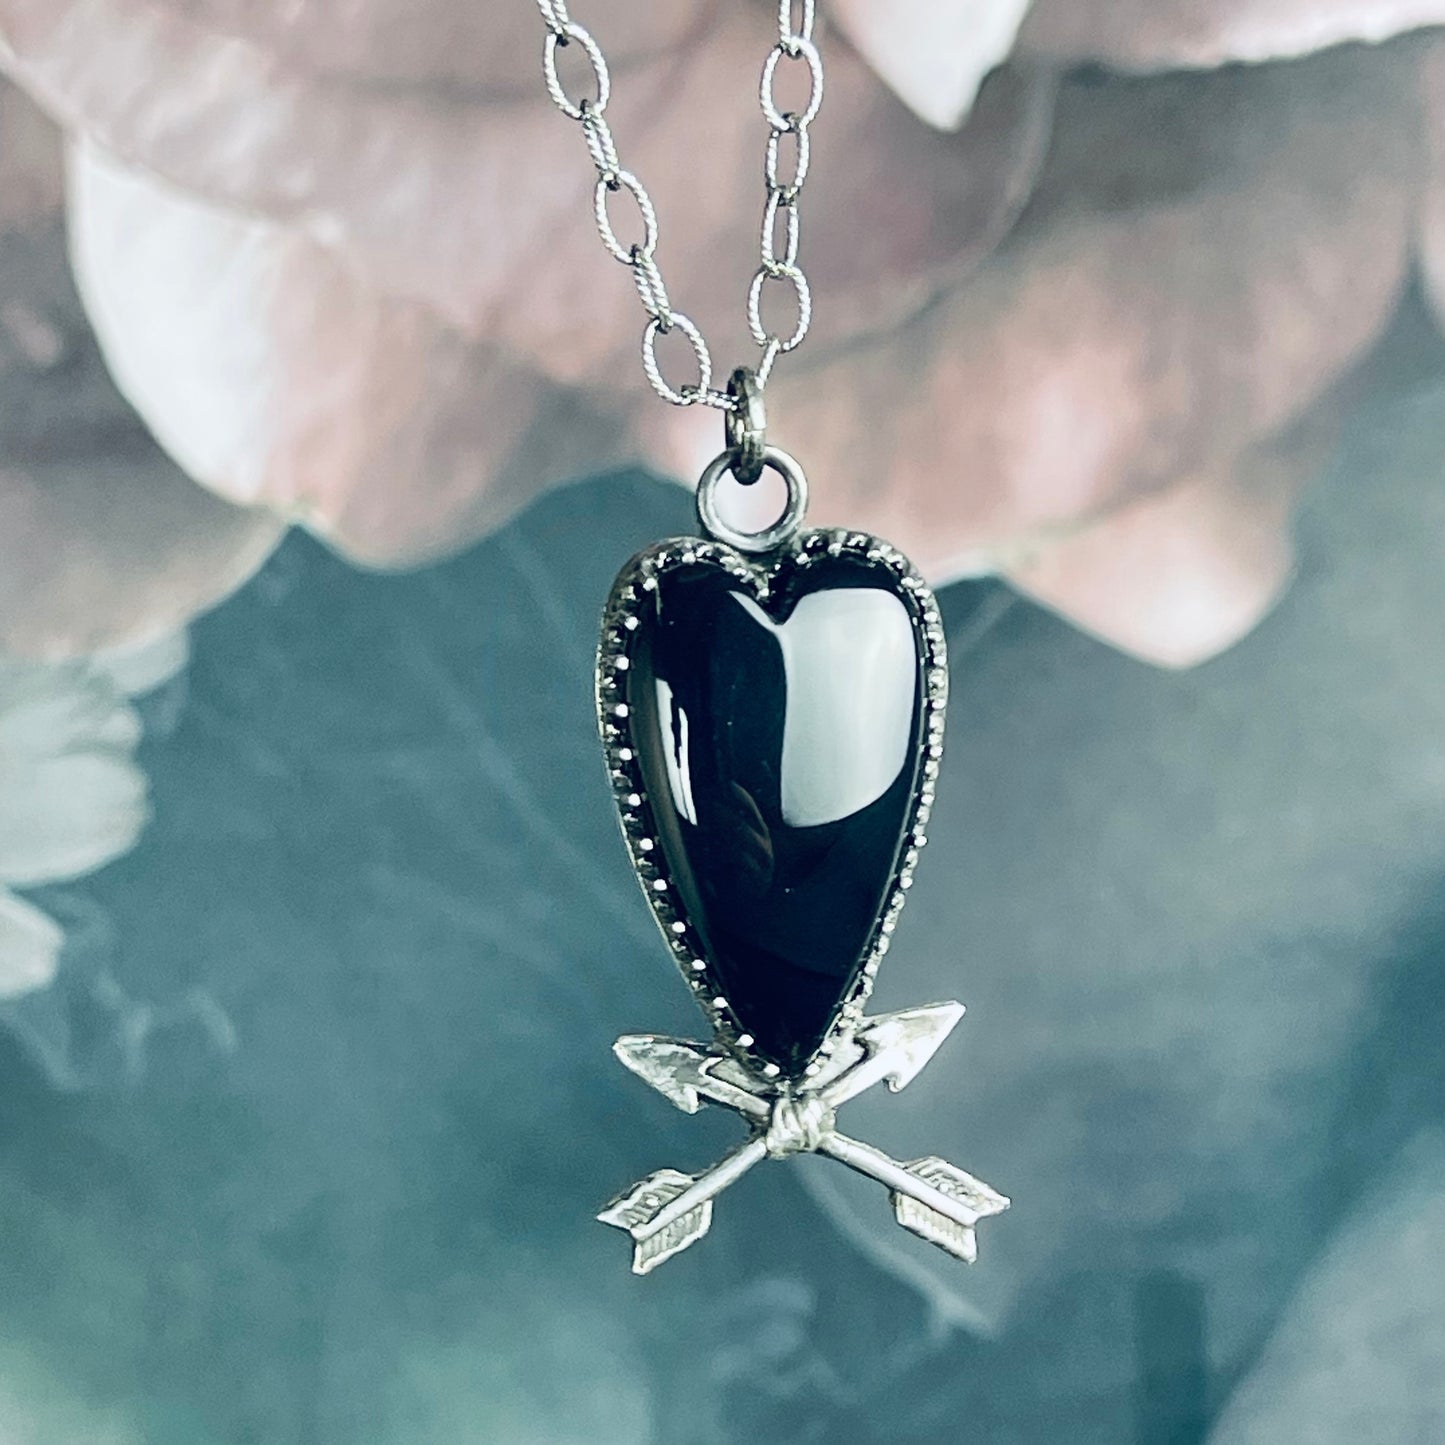 Gothic Victorian Handmade Crossed Arrow Onyx Heart Sterling Necklace